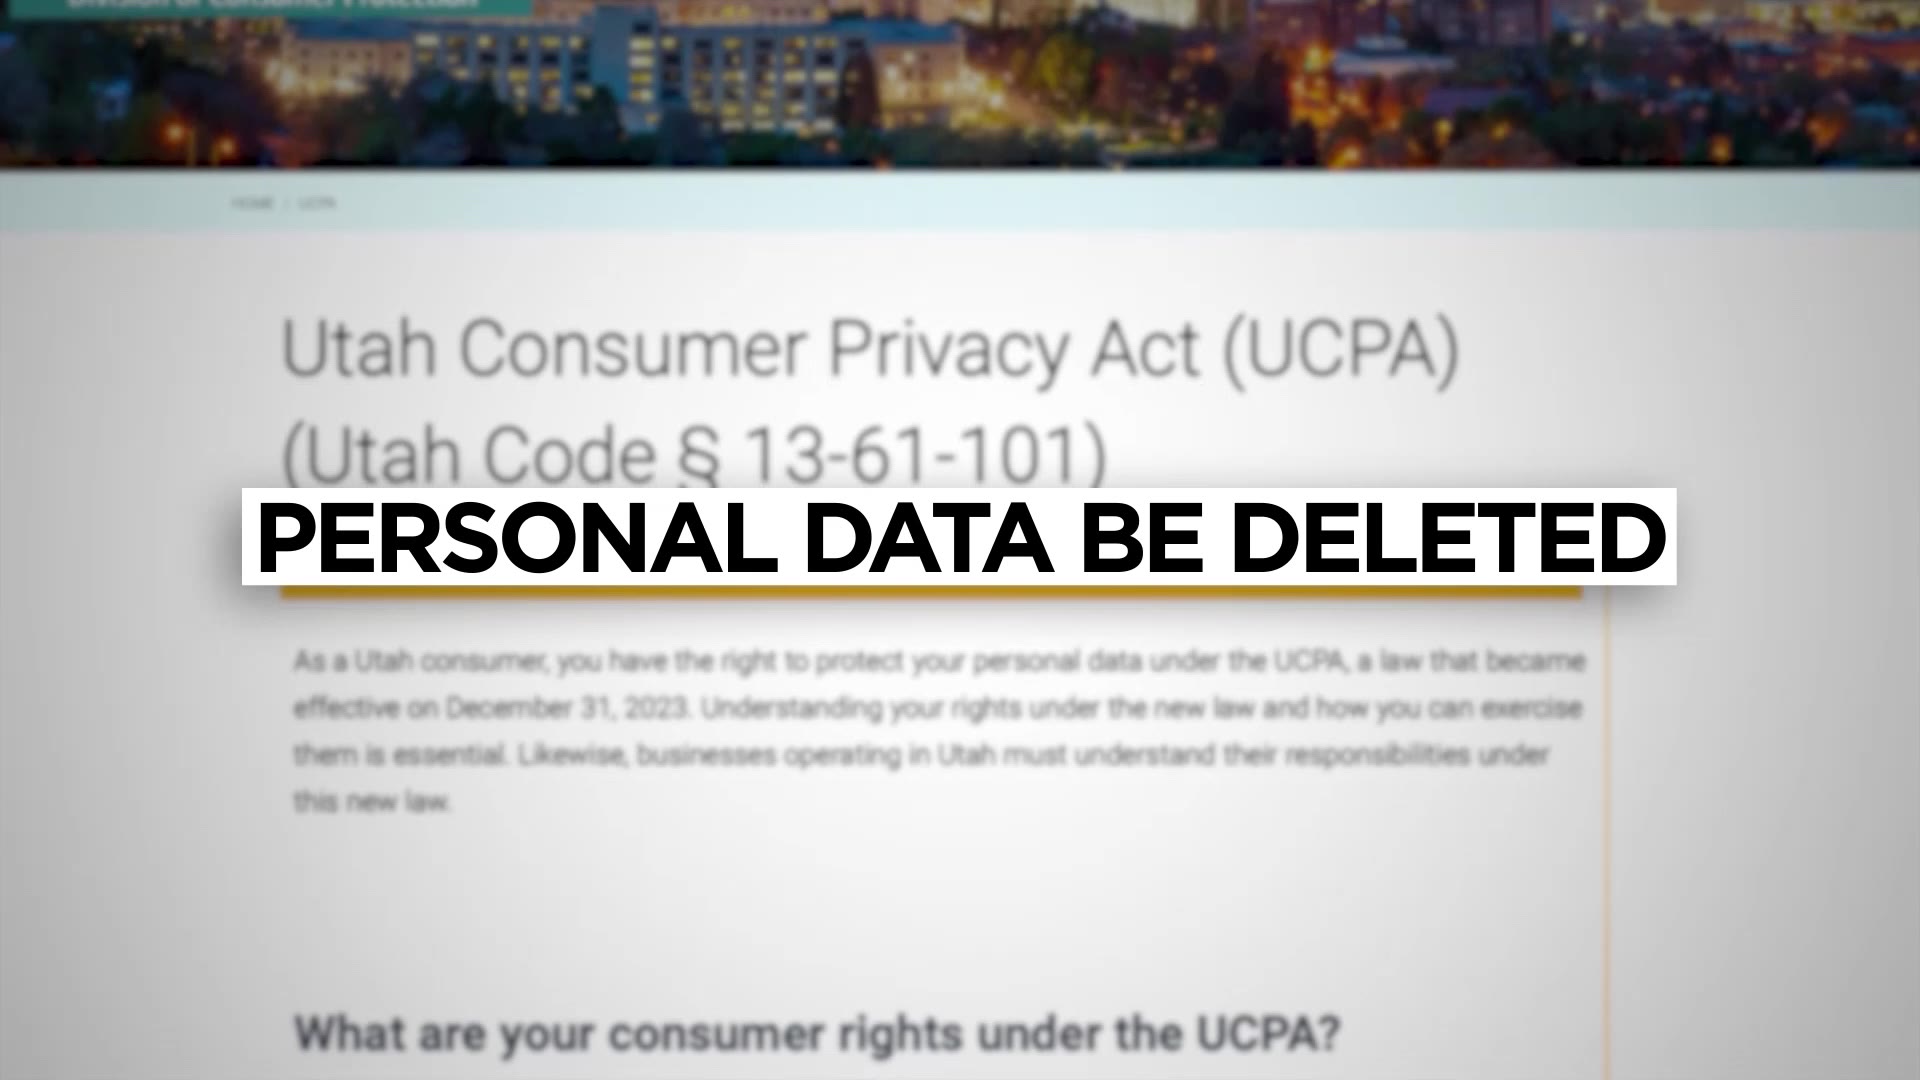 Utah Consumer Privacy Act stating the new rules that local businesses need to follow....